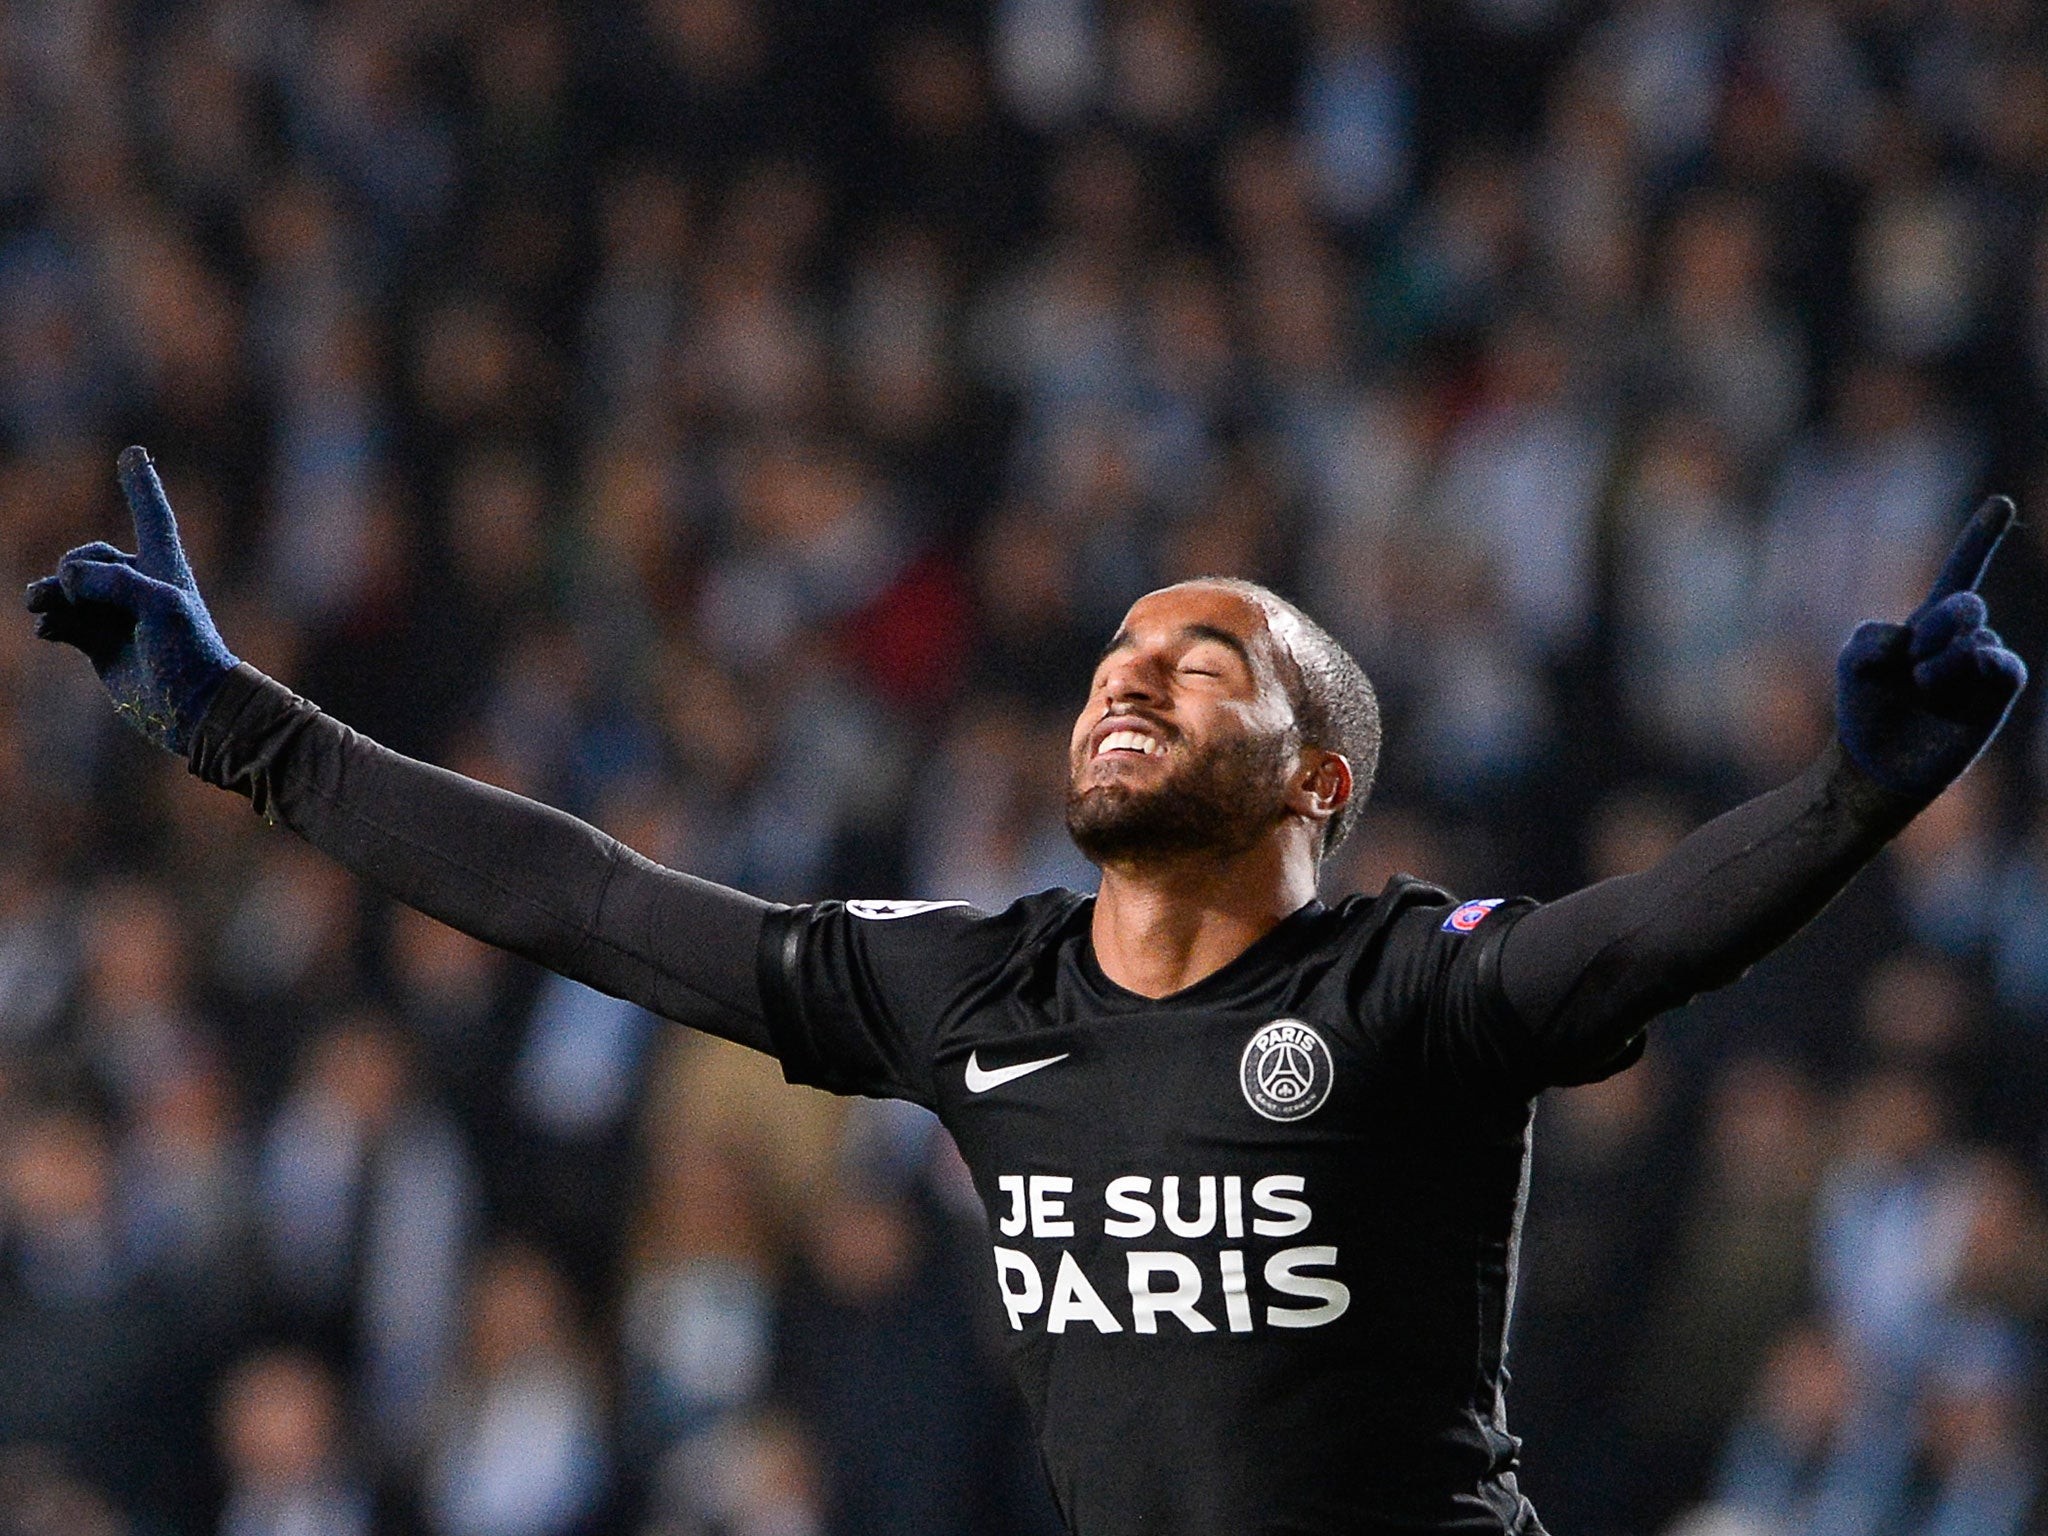 PSG forward Lucas Moura celebrates scoring against Malmo in the Champions League